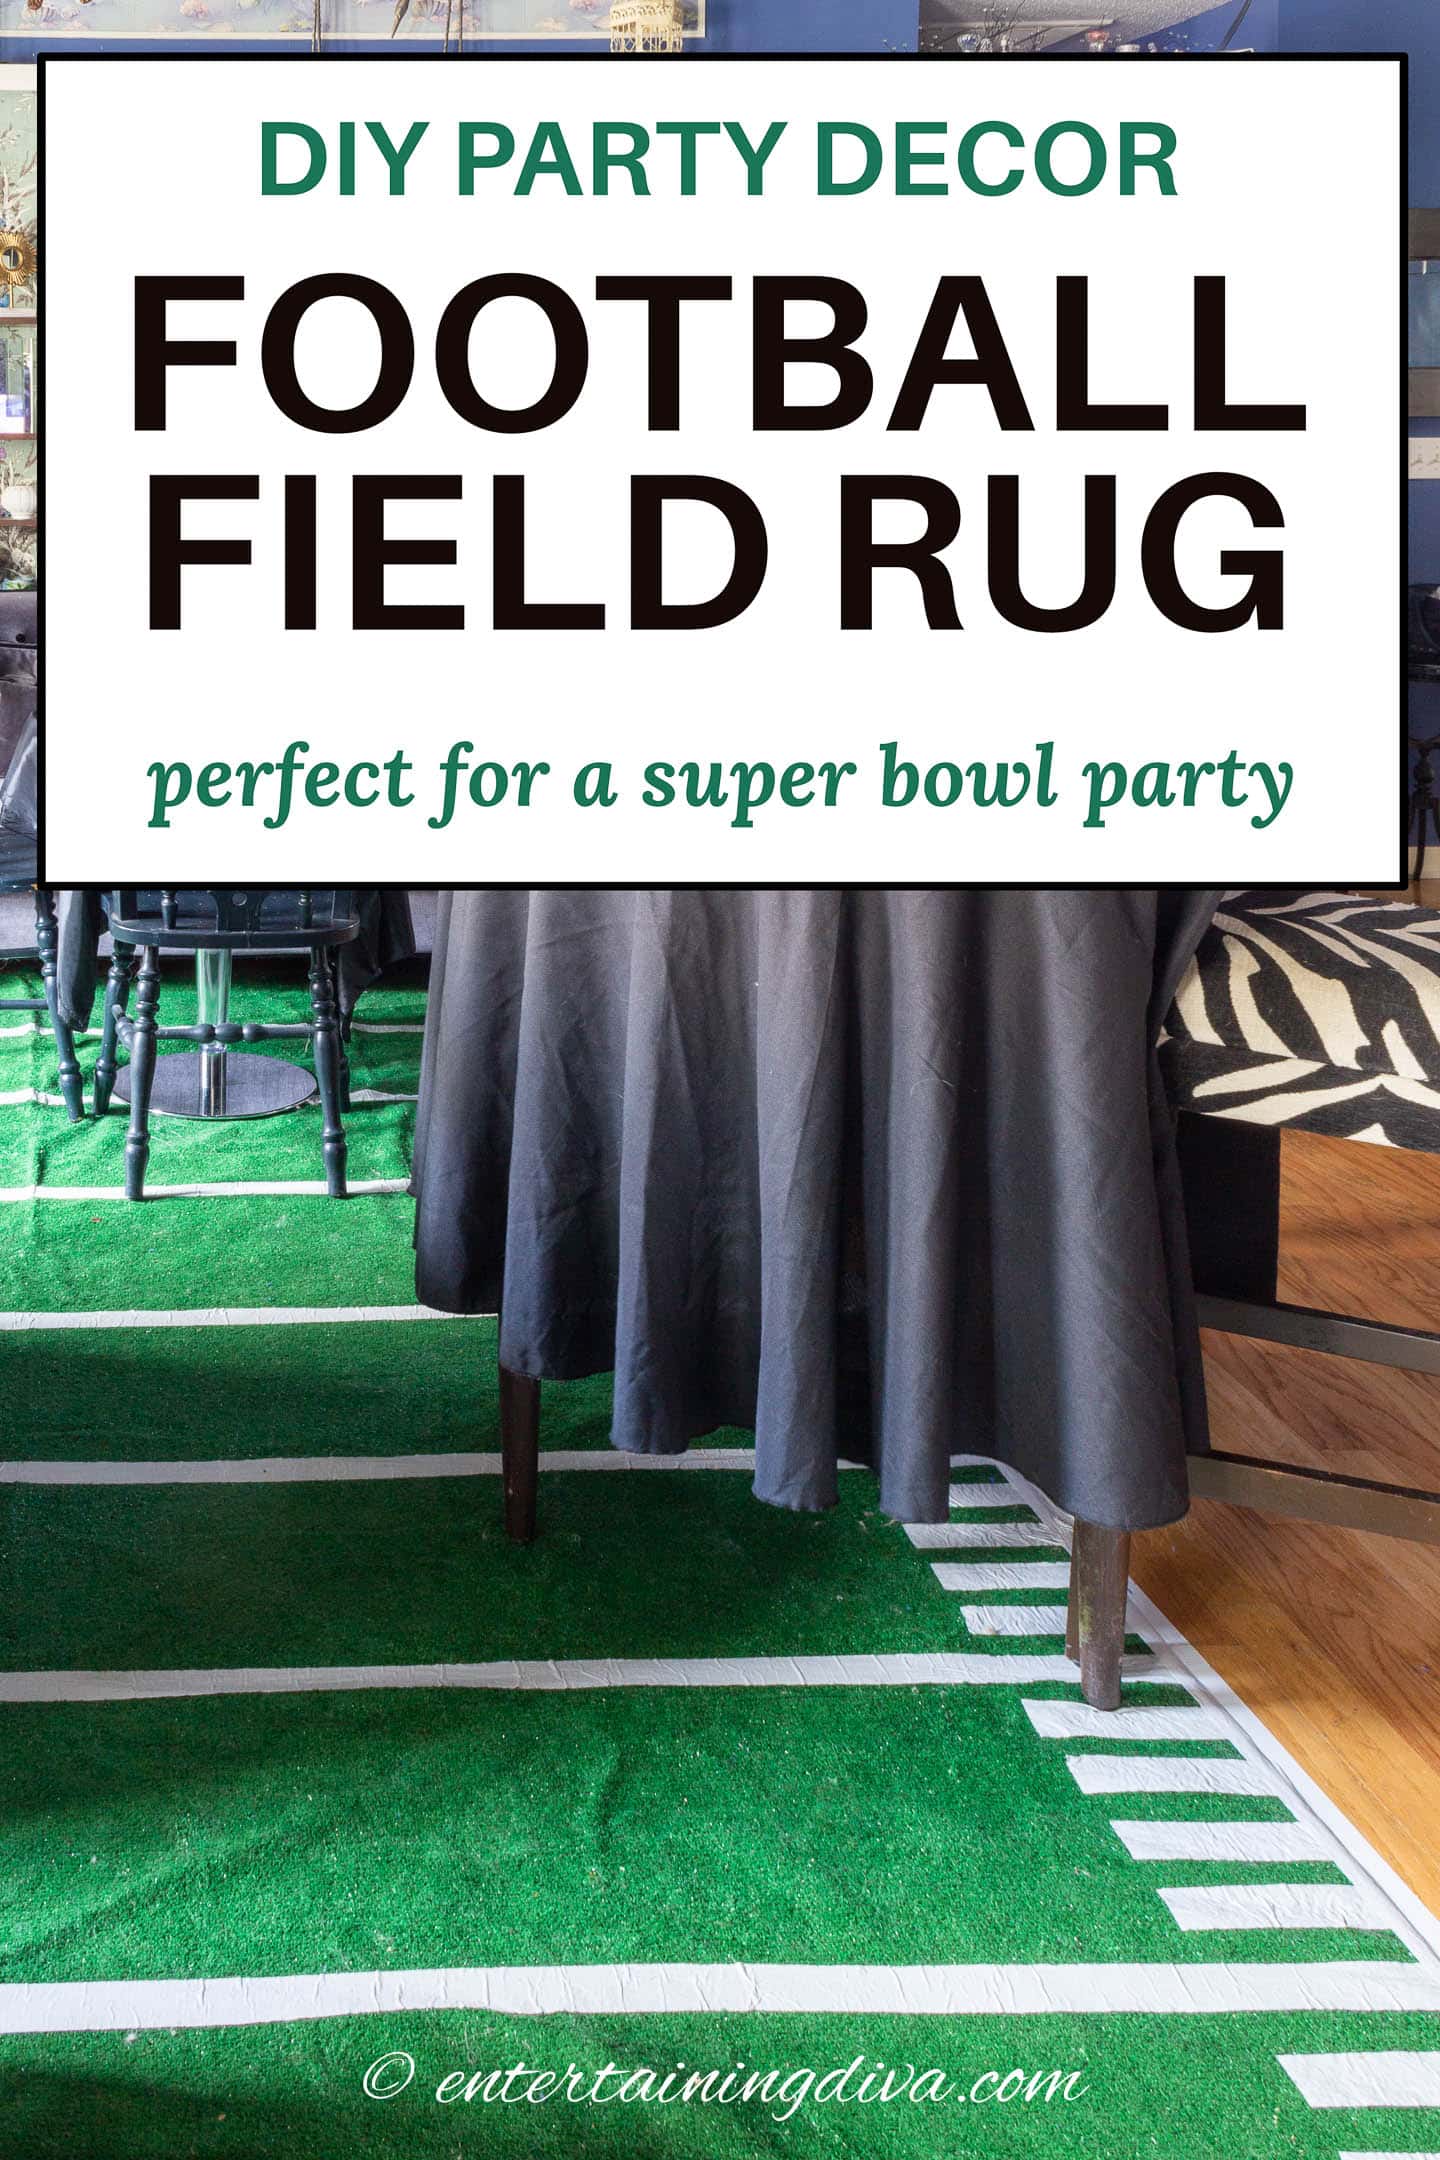 DIY football field rug that is perfect for a super bowl party